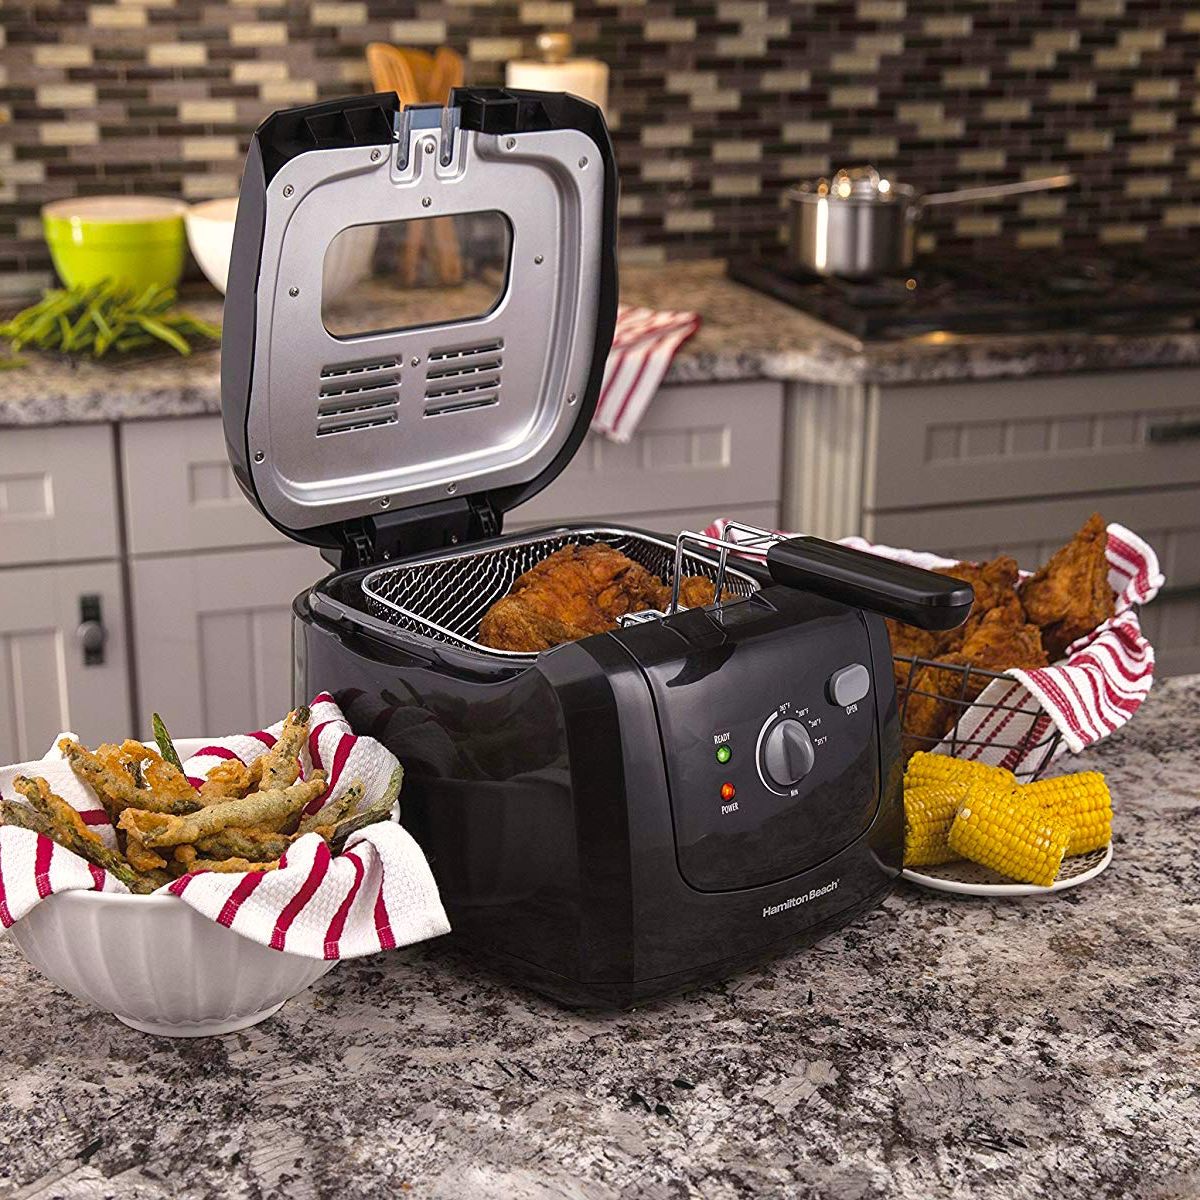 2 Liter Oil Capacity, Hamilton Beach 35021 Deep Fryer Cool Touch With Basket 